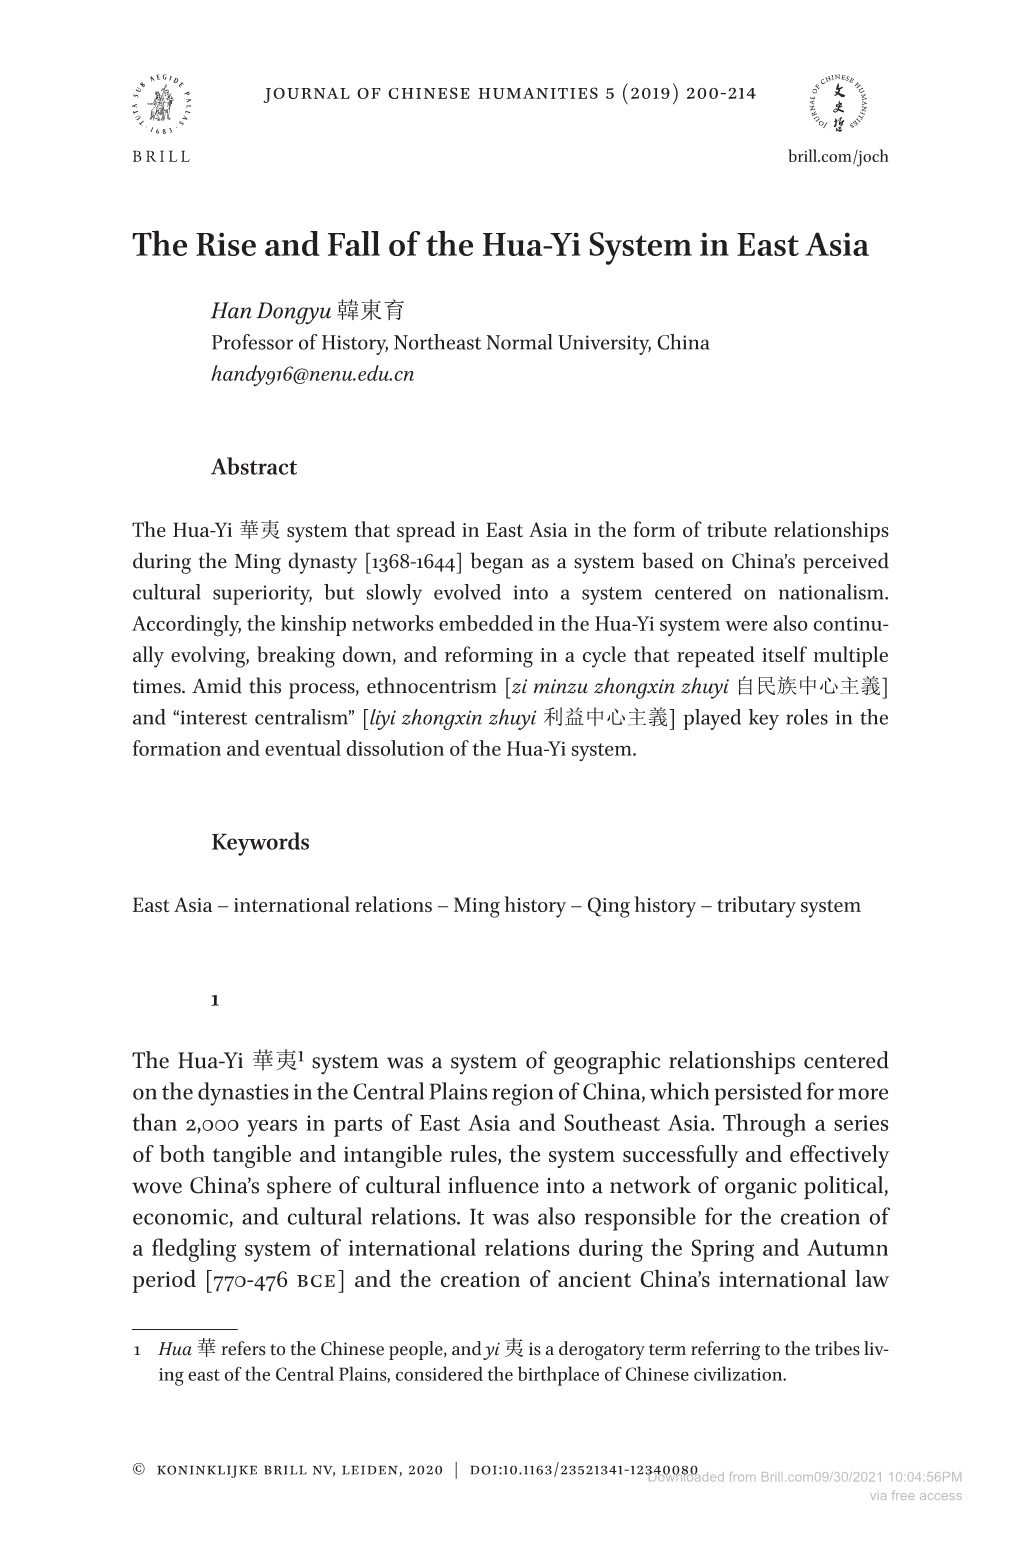 The Rise and Fall of the Hua-Yi System in East Asia